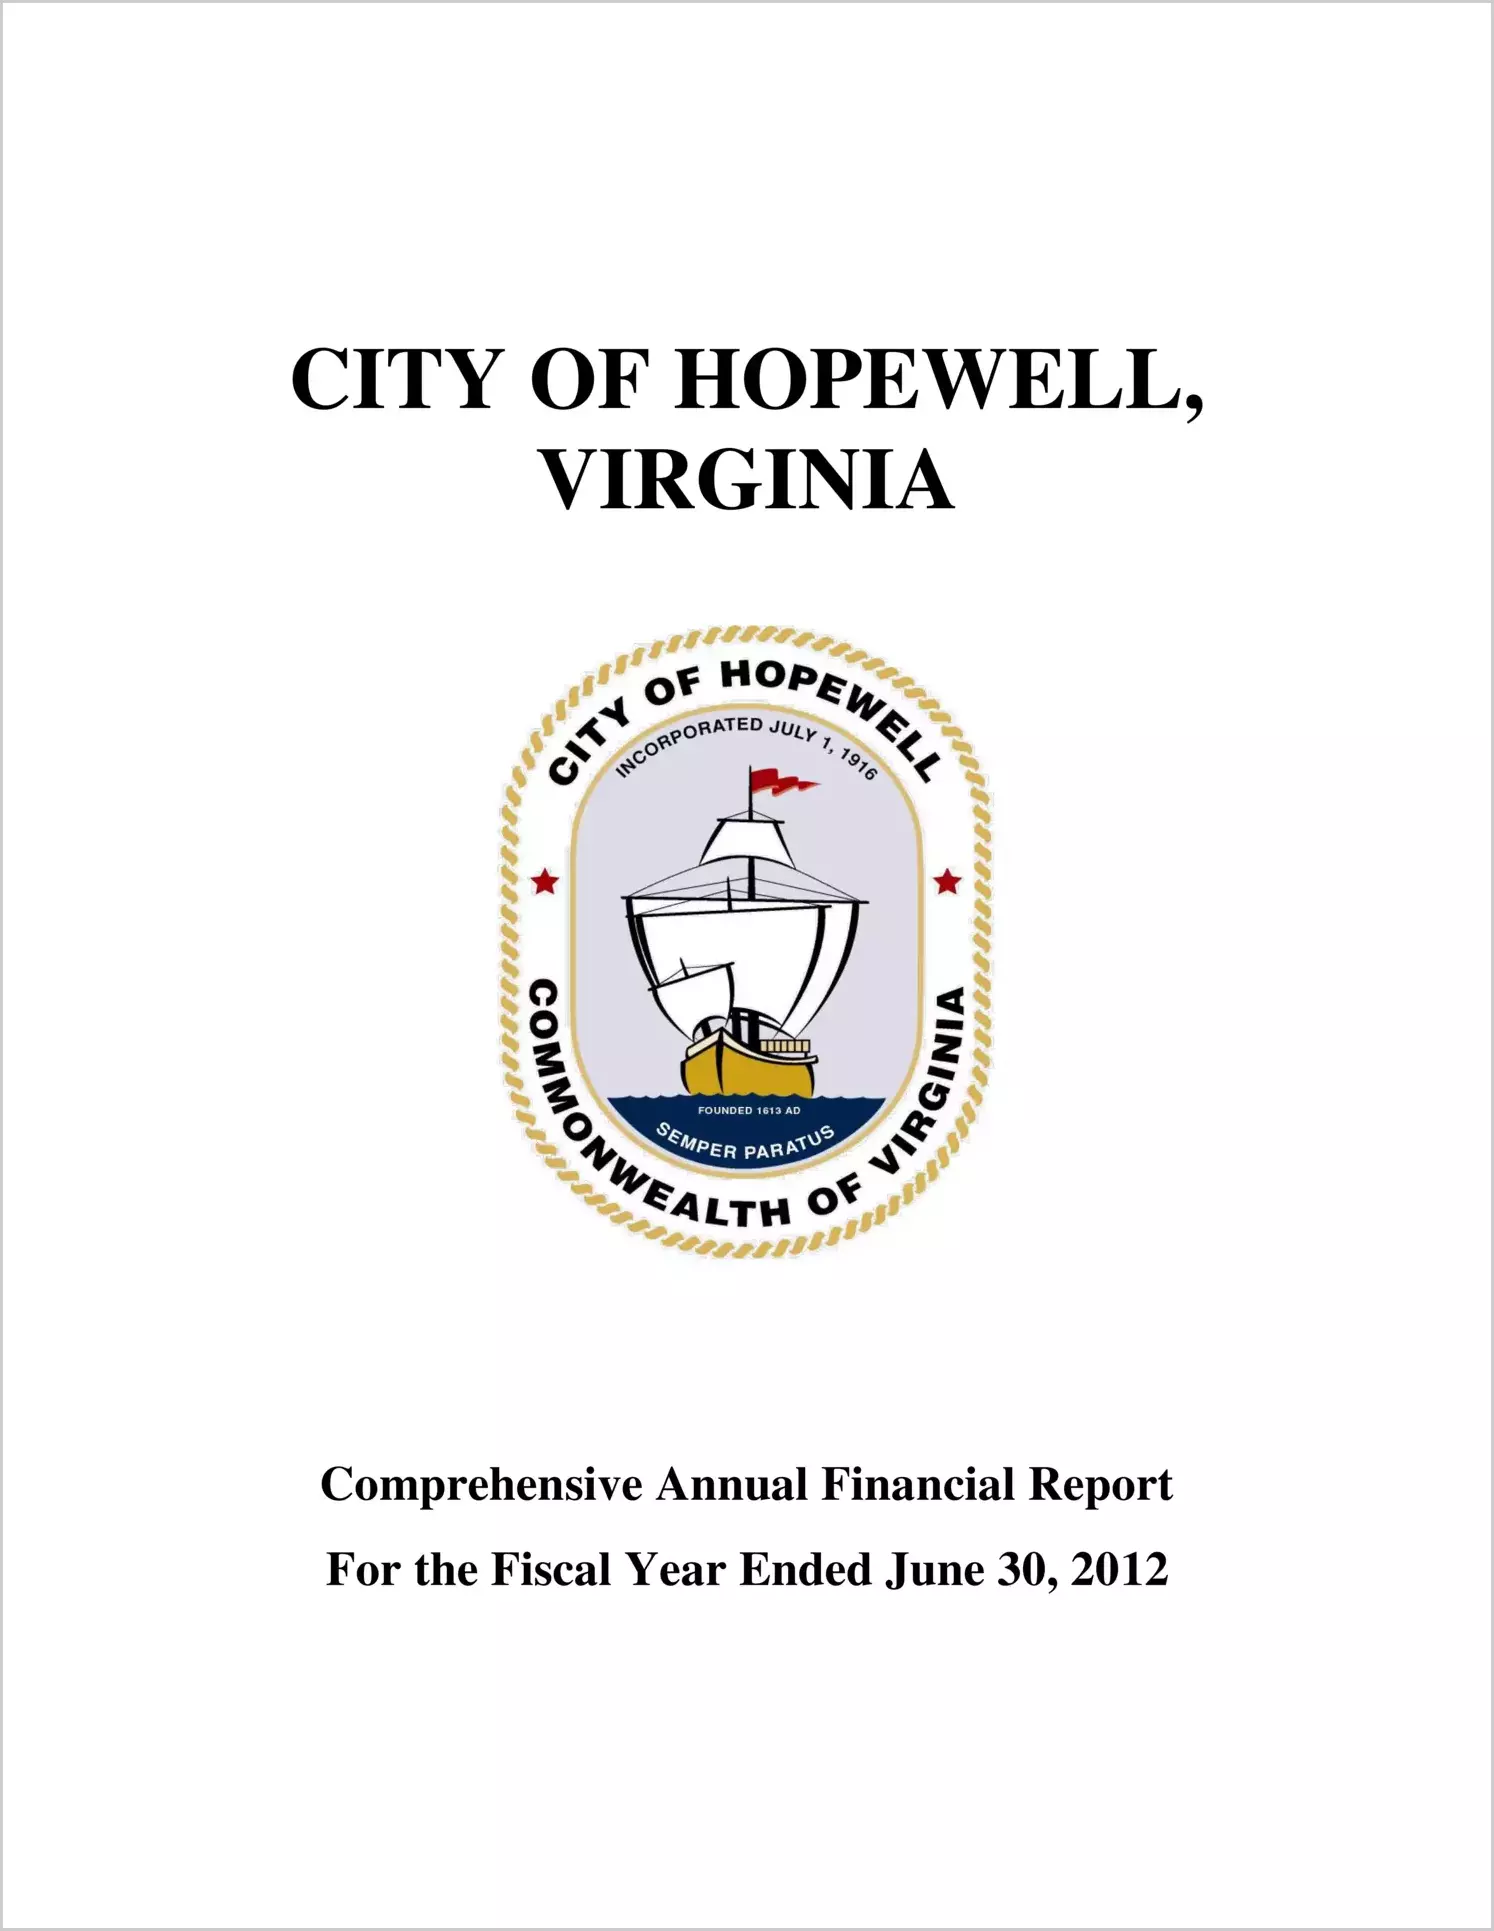 2012 Annual Financial Report for City of Hopewell